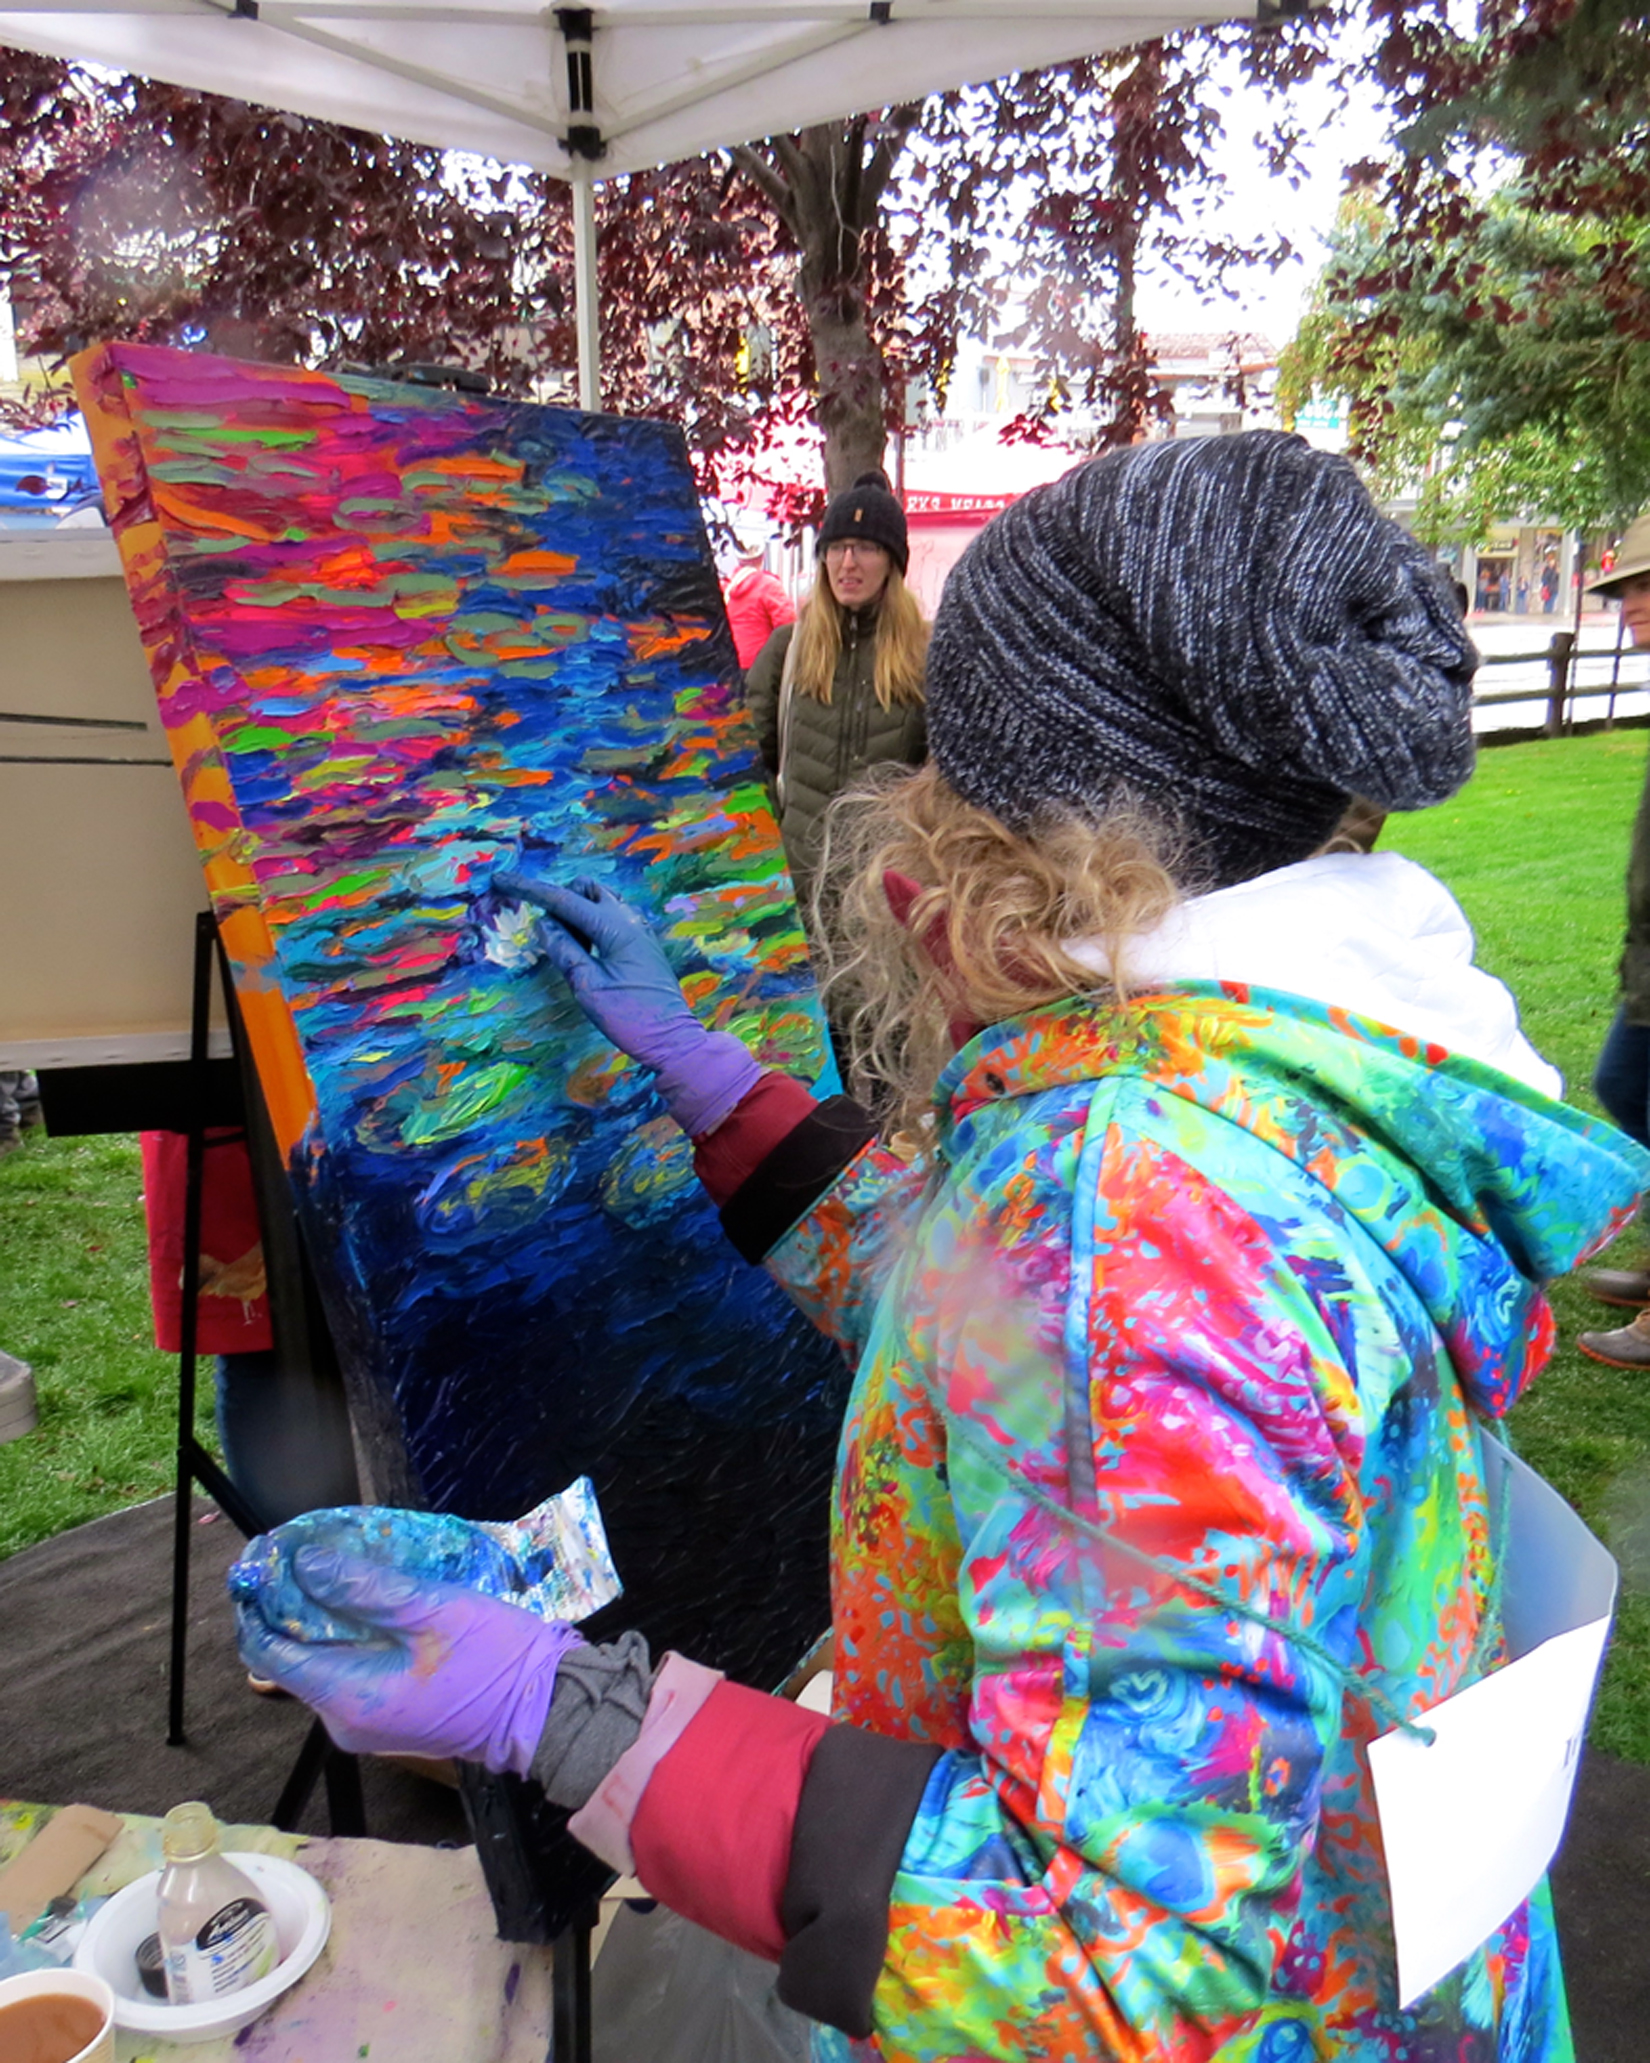 The QuickDraw event, a Jackson Hole Fall Arts Festival favorite, brings artists outdoors on the Town Square where they complete works in 90 minutes before the pieces are auctioned off to a live crowd.